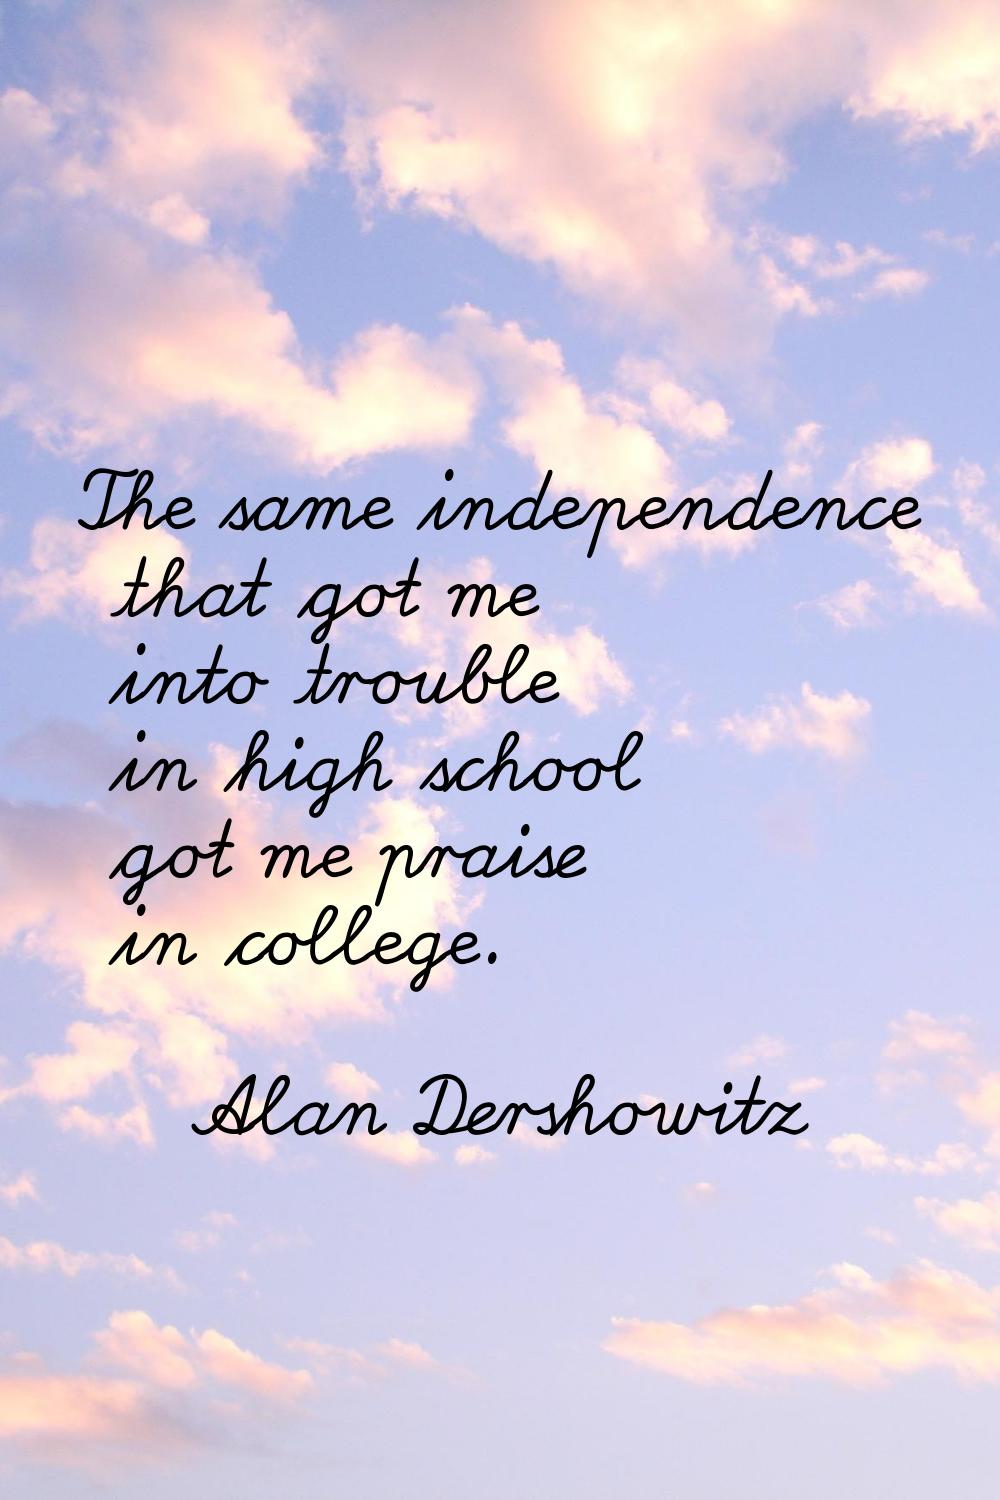 The same independence that got me into trouble in high school got me praise in college.